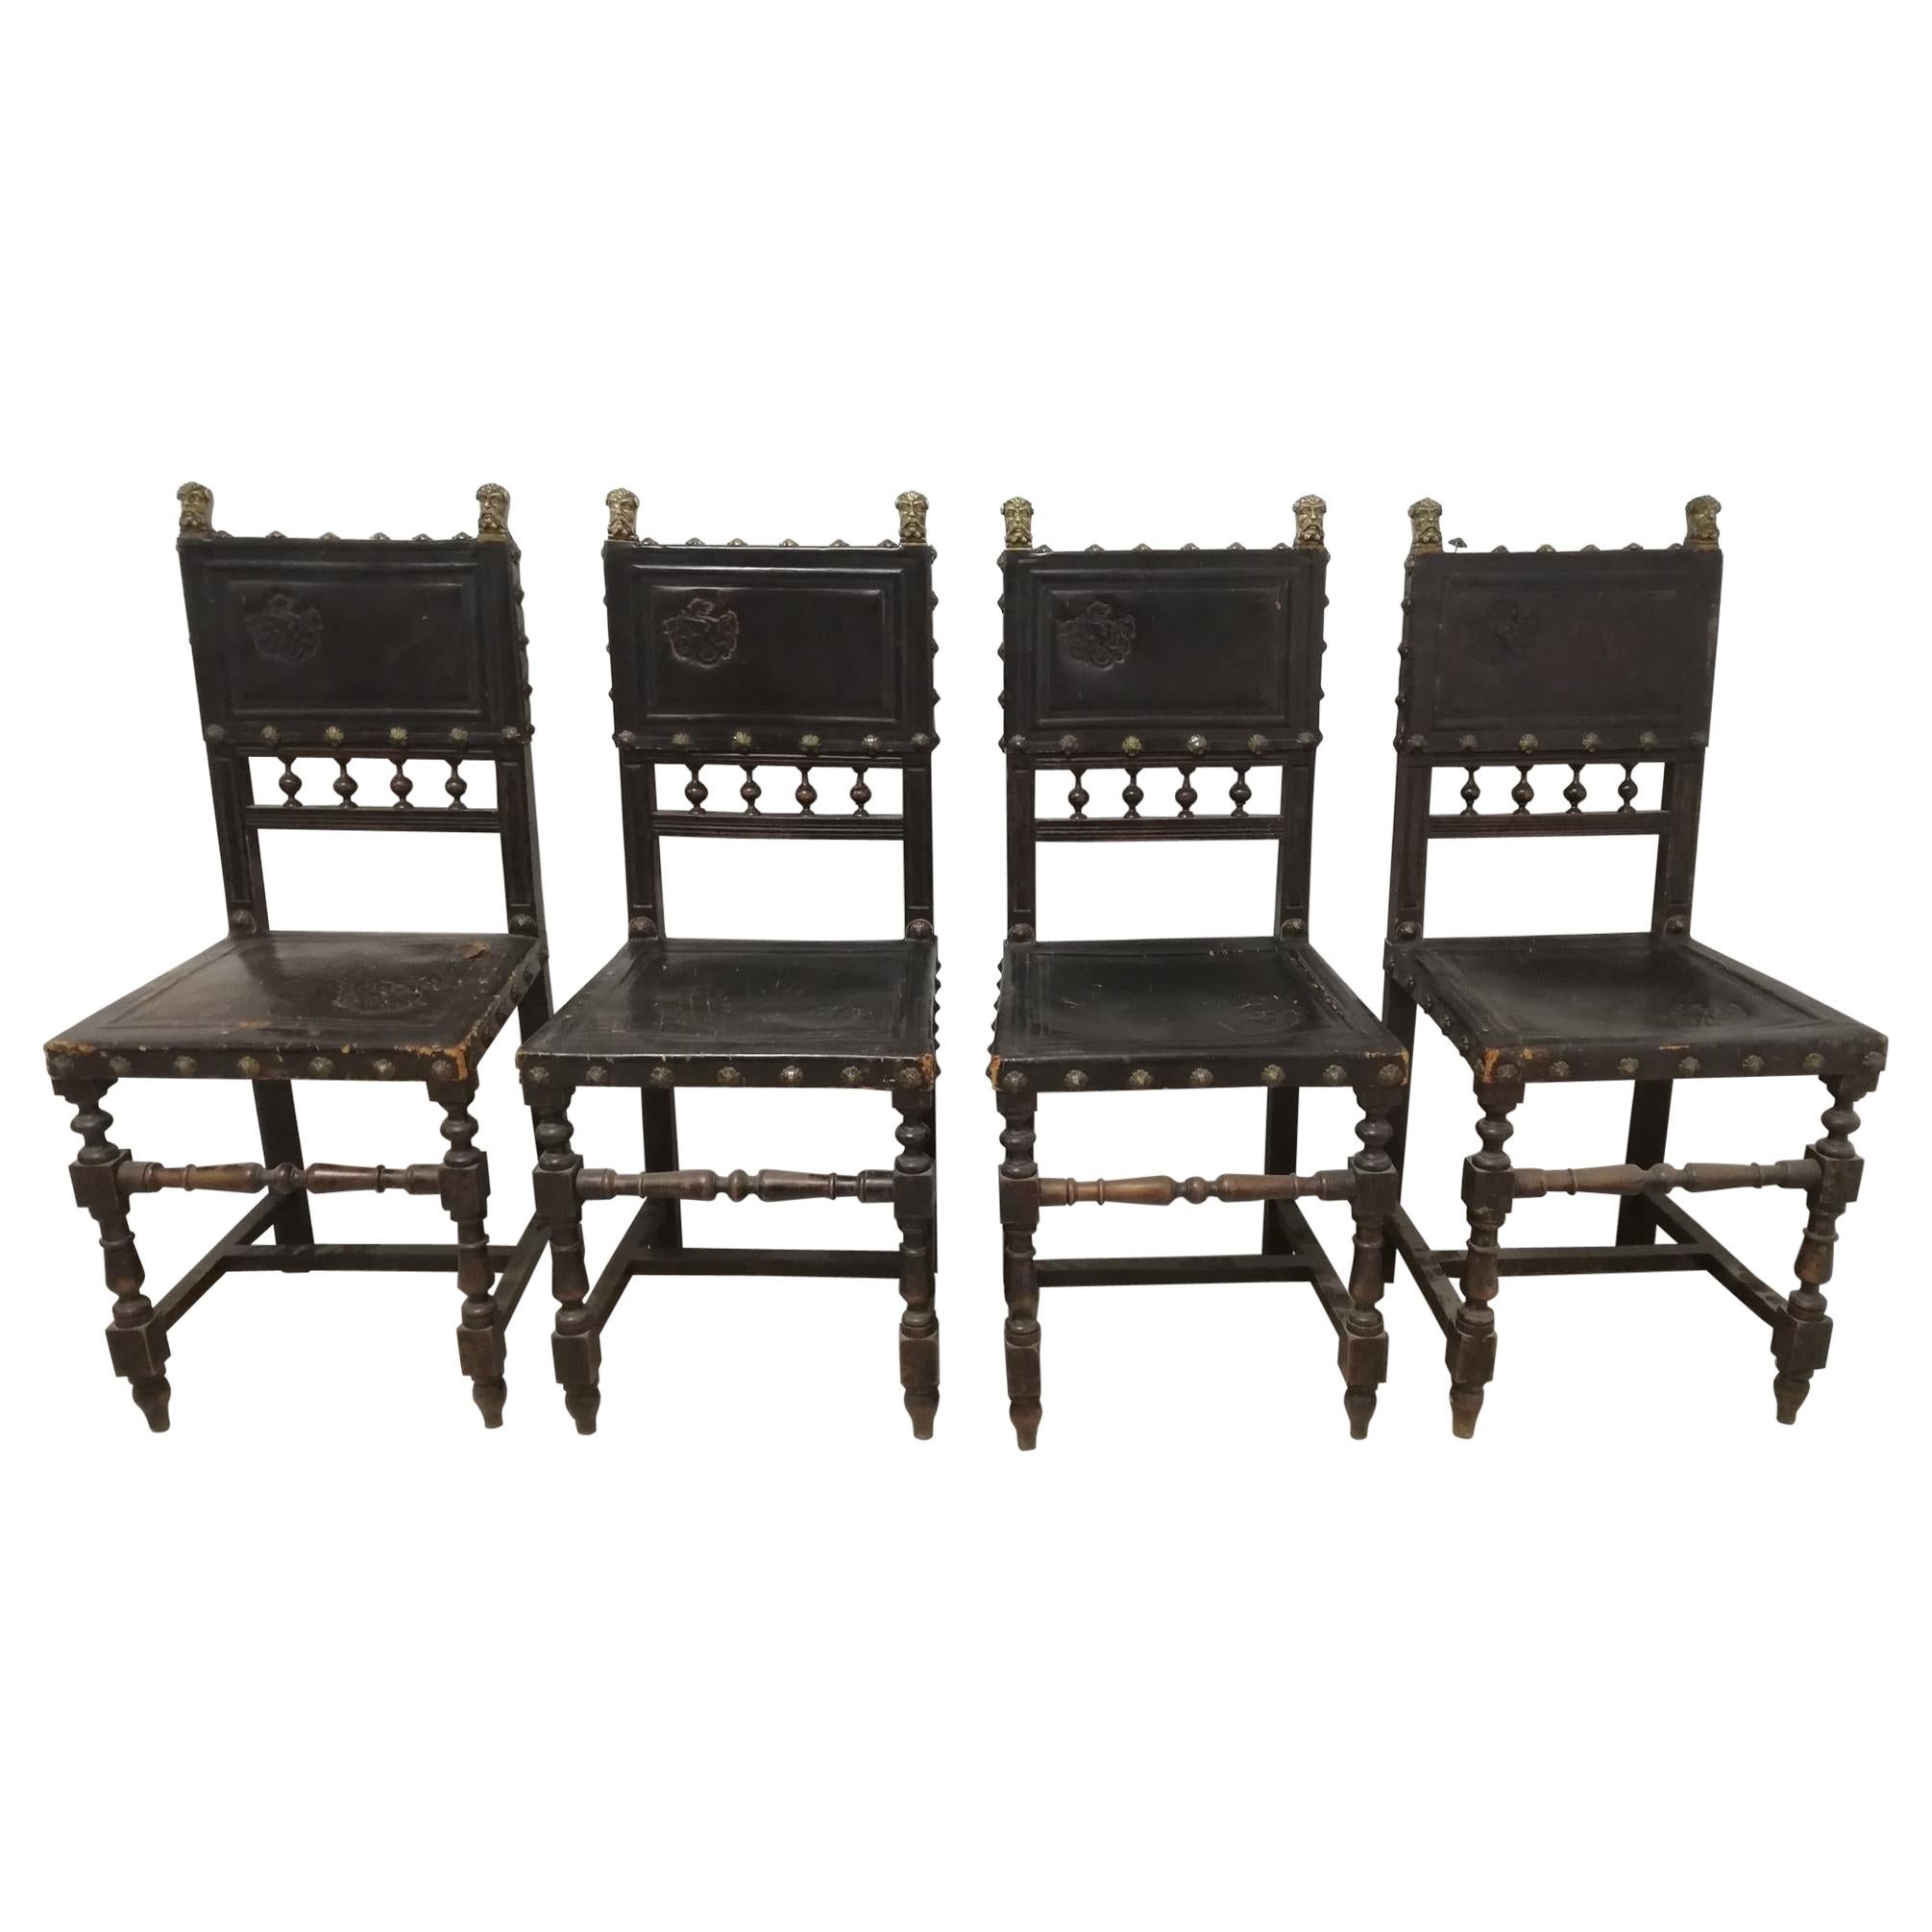 Set of 4 Armchairs from the 19th Century in Rennaisance Louis XVIII Style